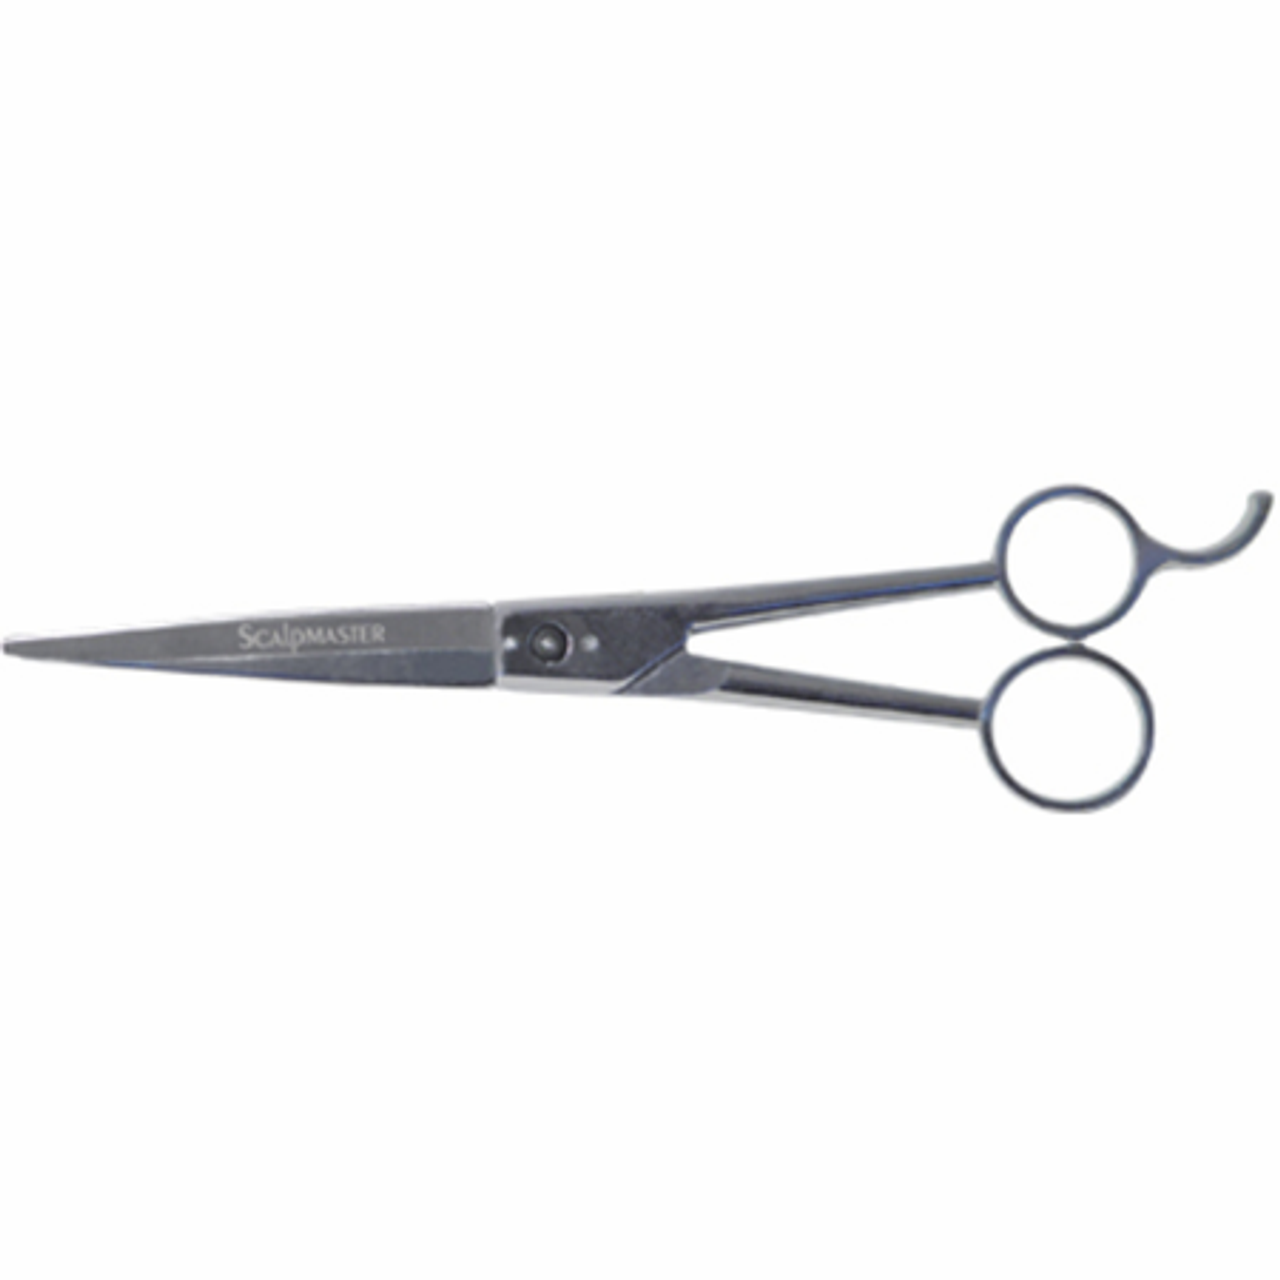 Scalpmaster Ice Tempered Stainless Steel Shears - 7.5in.